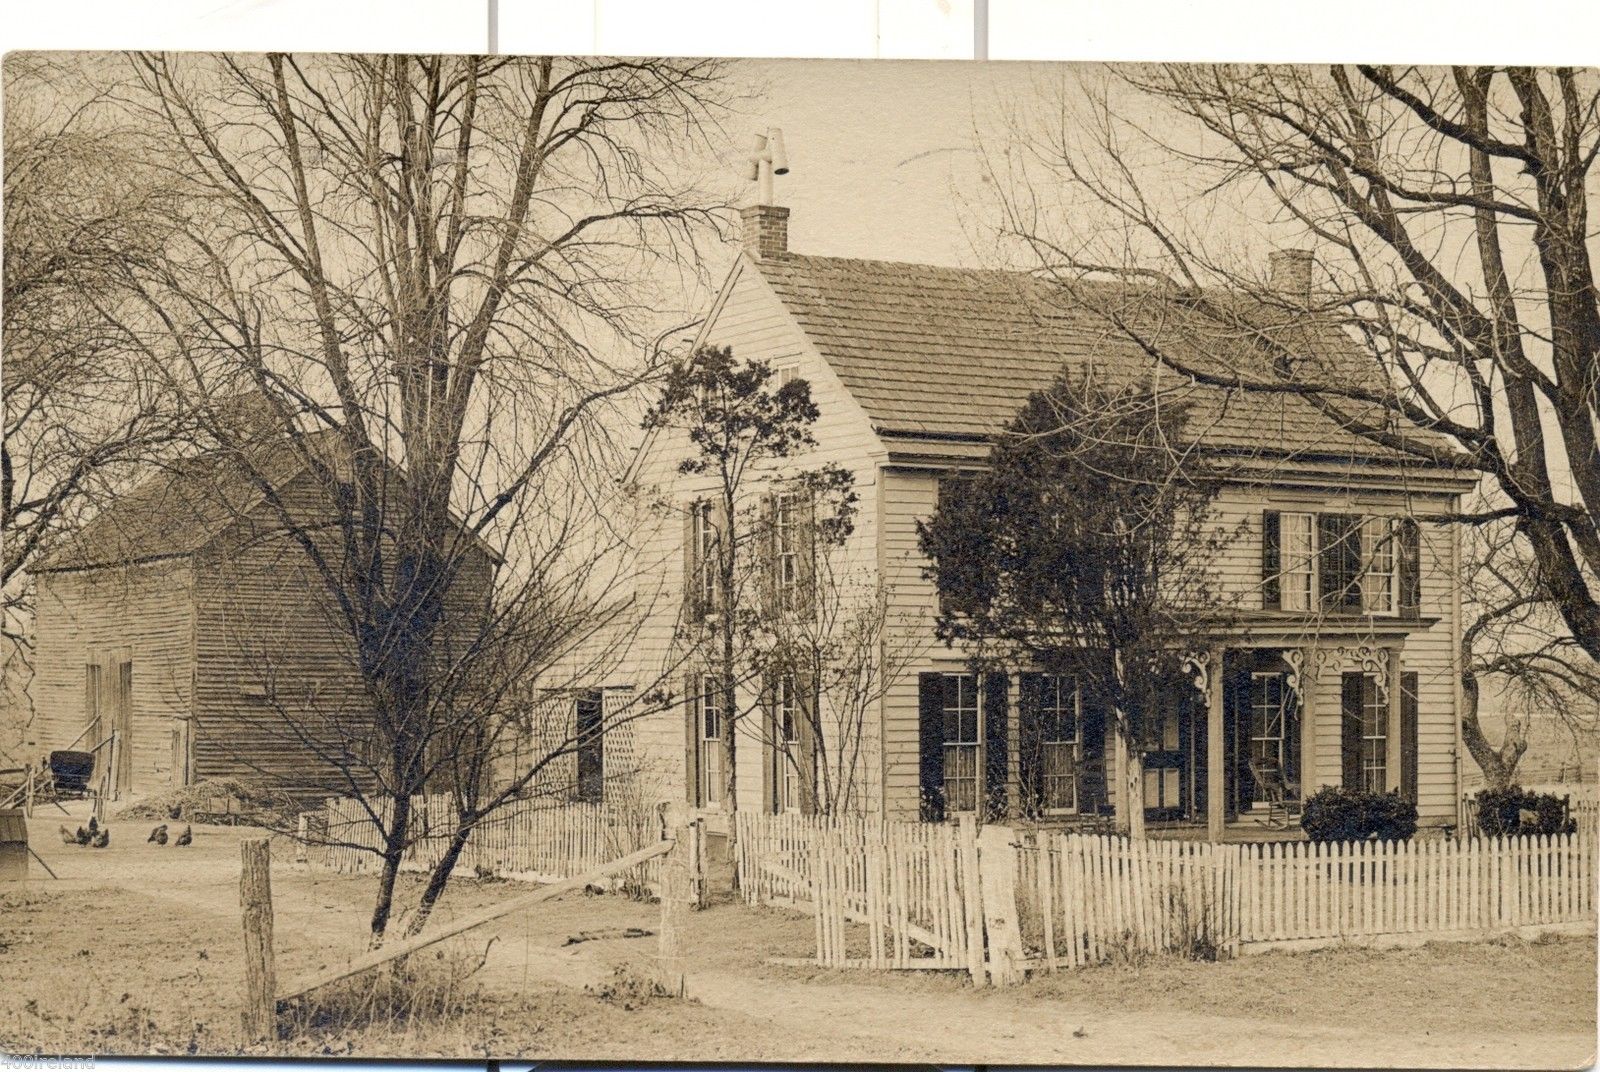 Medford or vicinity - House and Barn - postmarked 1930